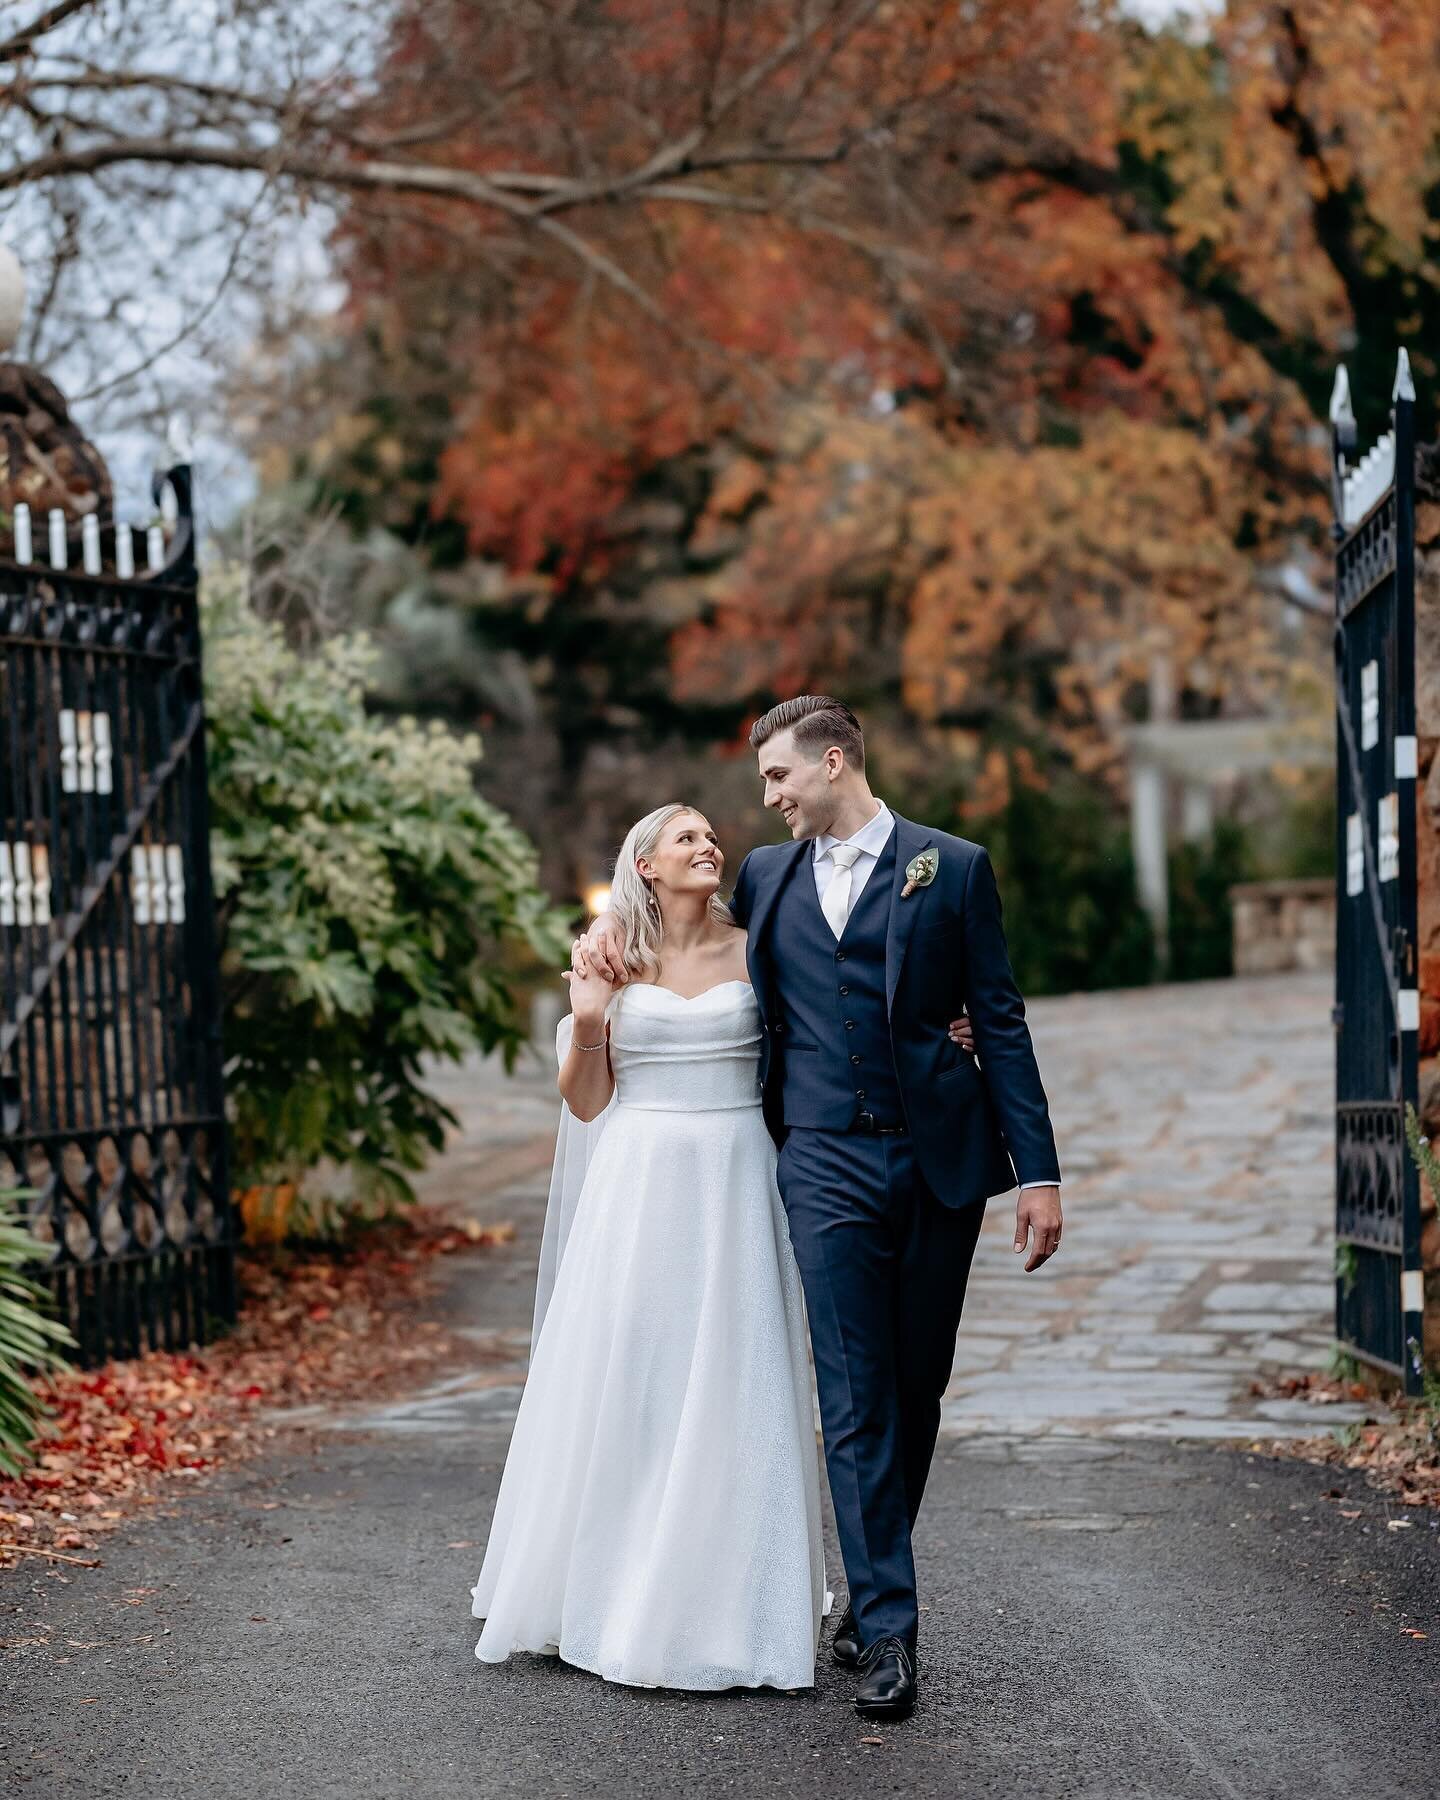 Chelsea + Tim ❤️ winter wonderland 

These two are just the absolute sweetest! We loved this day so much.  Take this as a sign to have a winter wedding! This was early winter with 🍂  leaves still clinging to the trees and the most beautiful sunny da